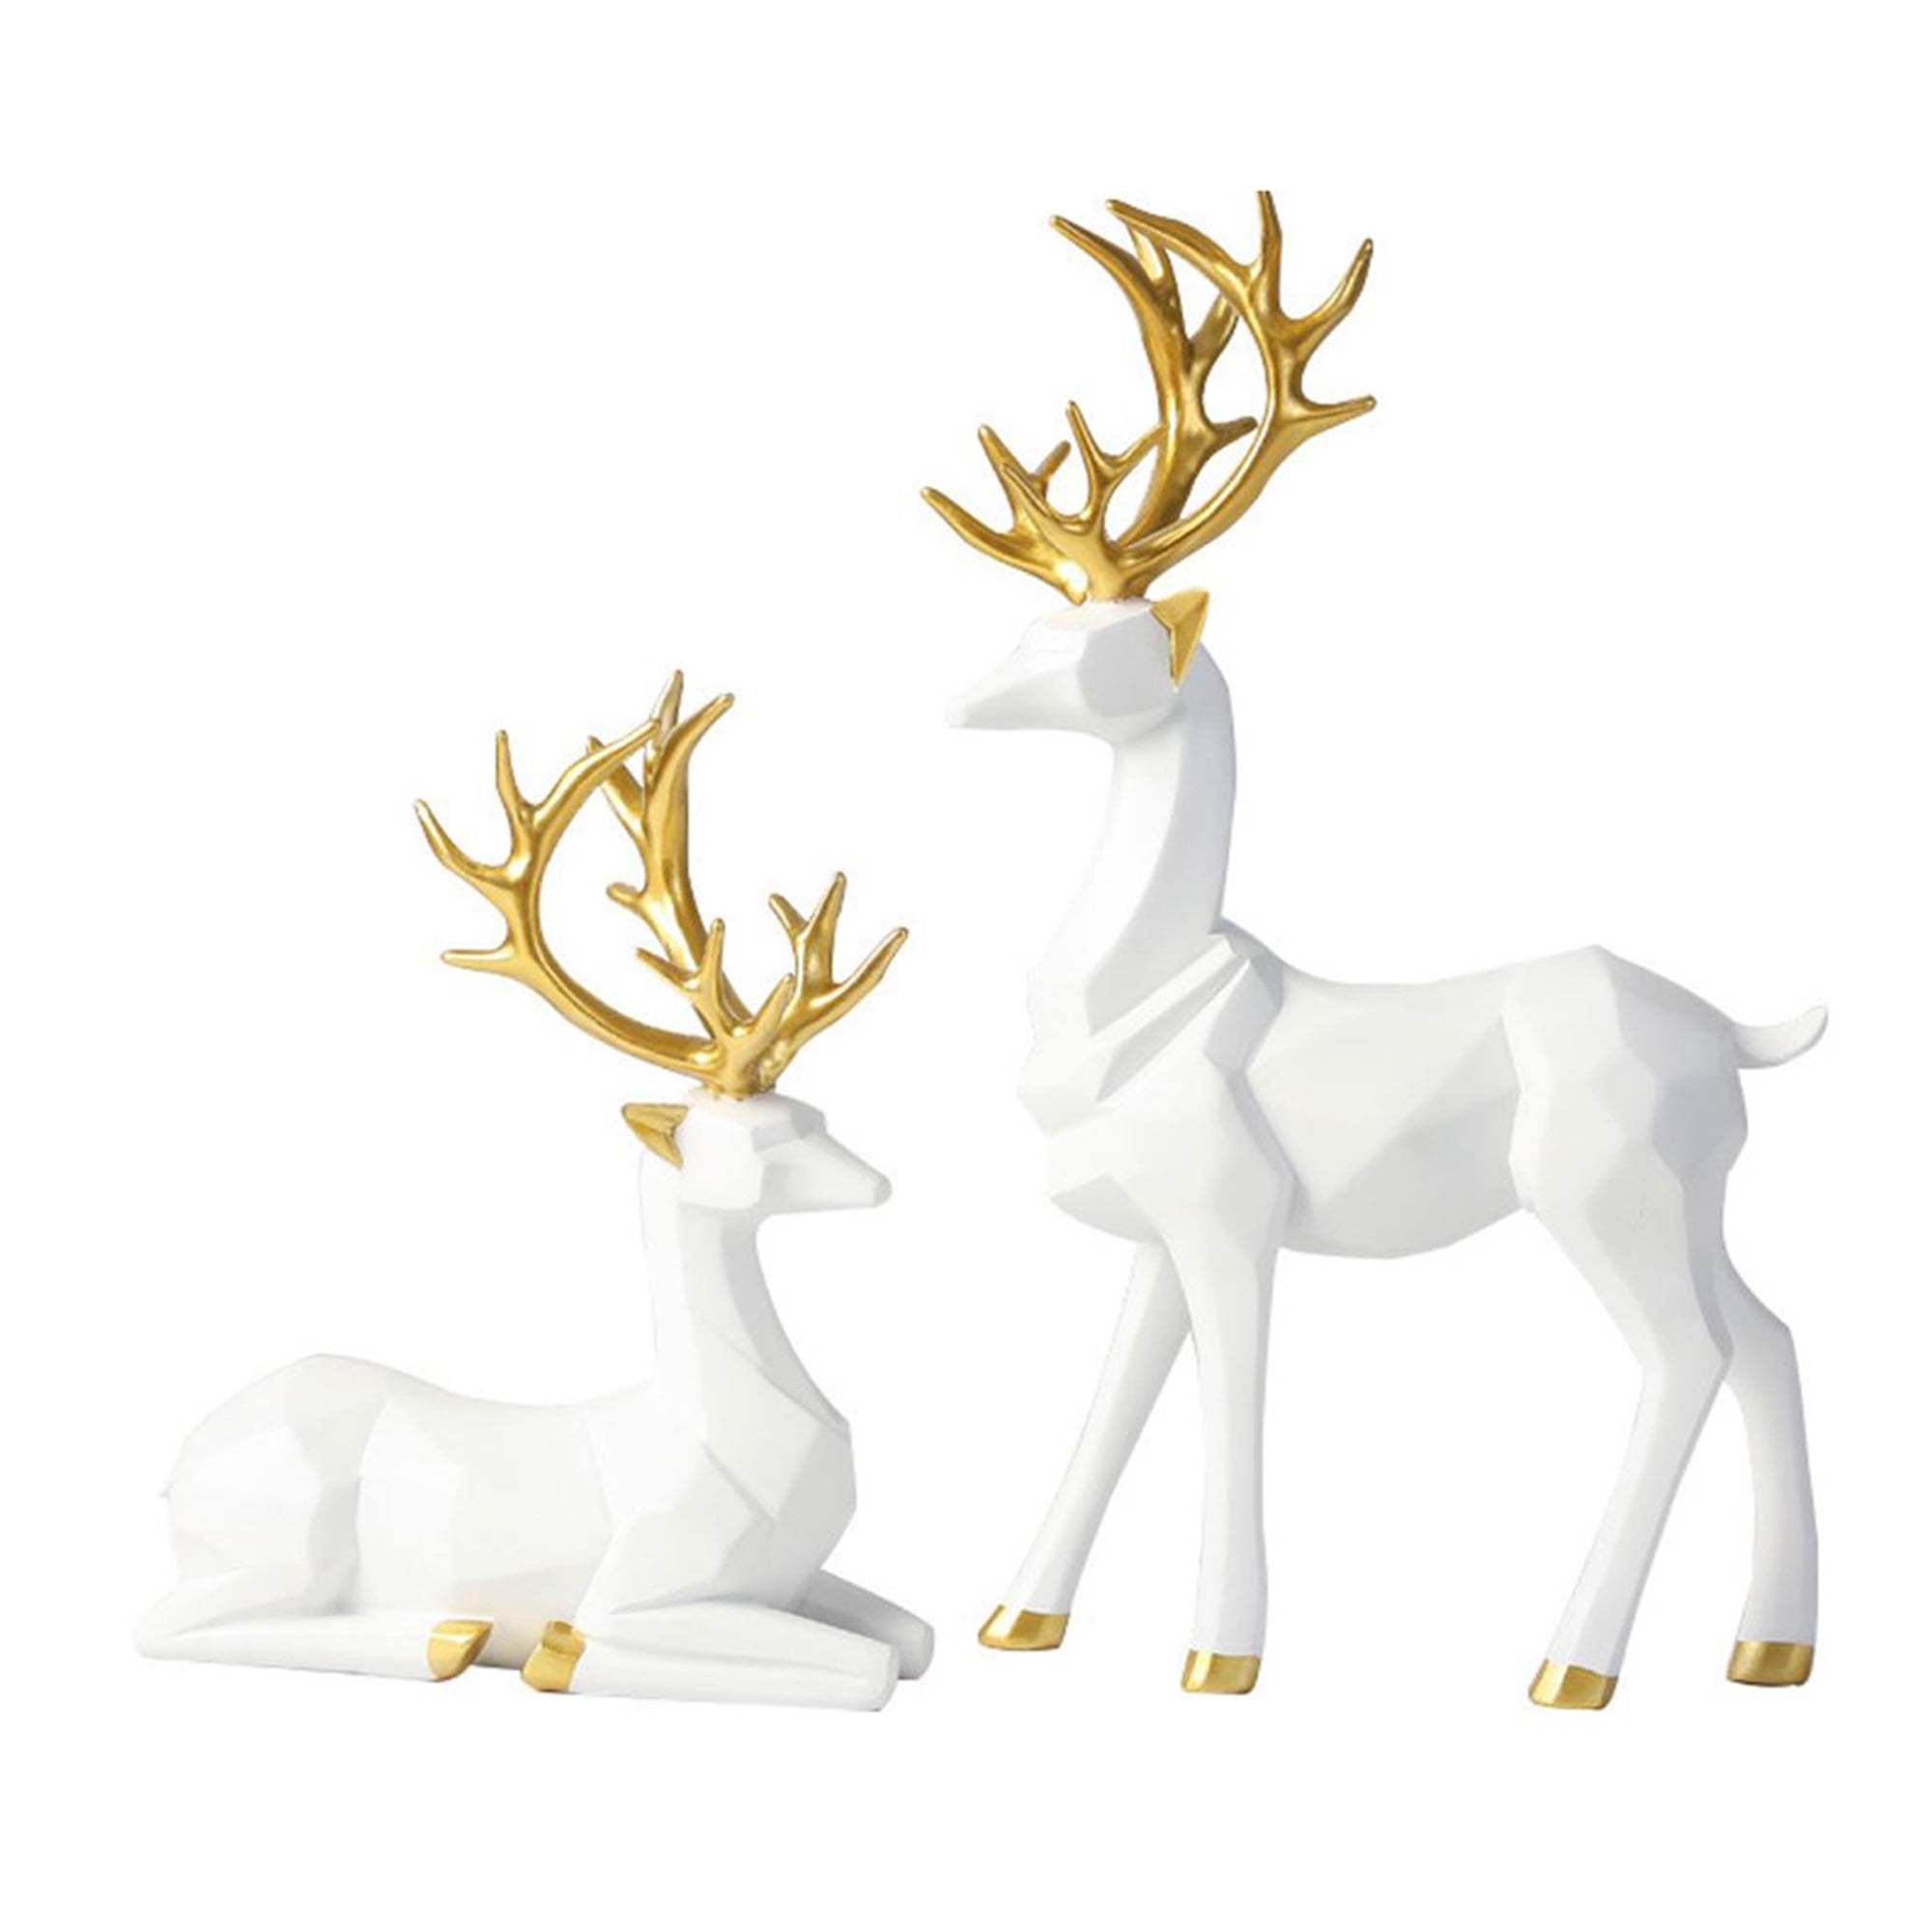 Animal Head Wall Sculptures Art Decor Flocking Resin Deer With Gold Antlers For